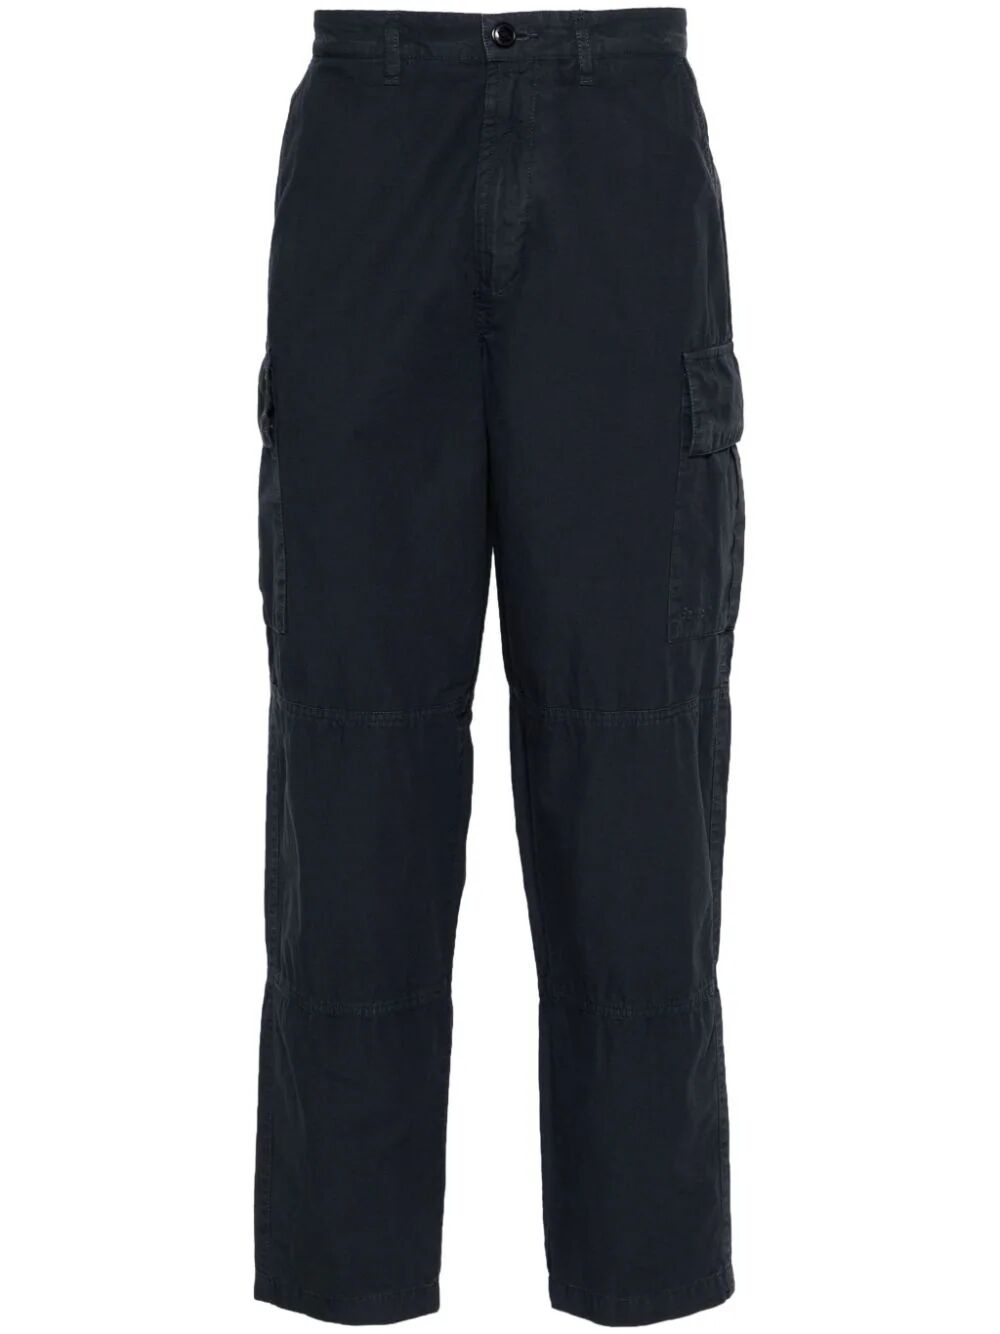 ESSENTIAL RIPSTOP CARGO TROUSERS - 4